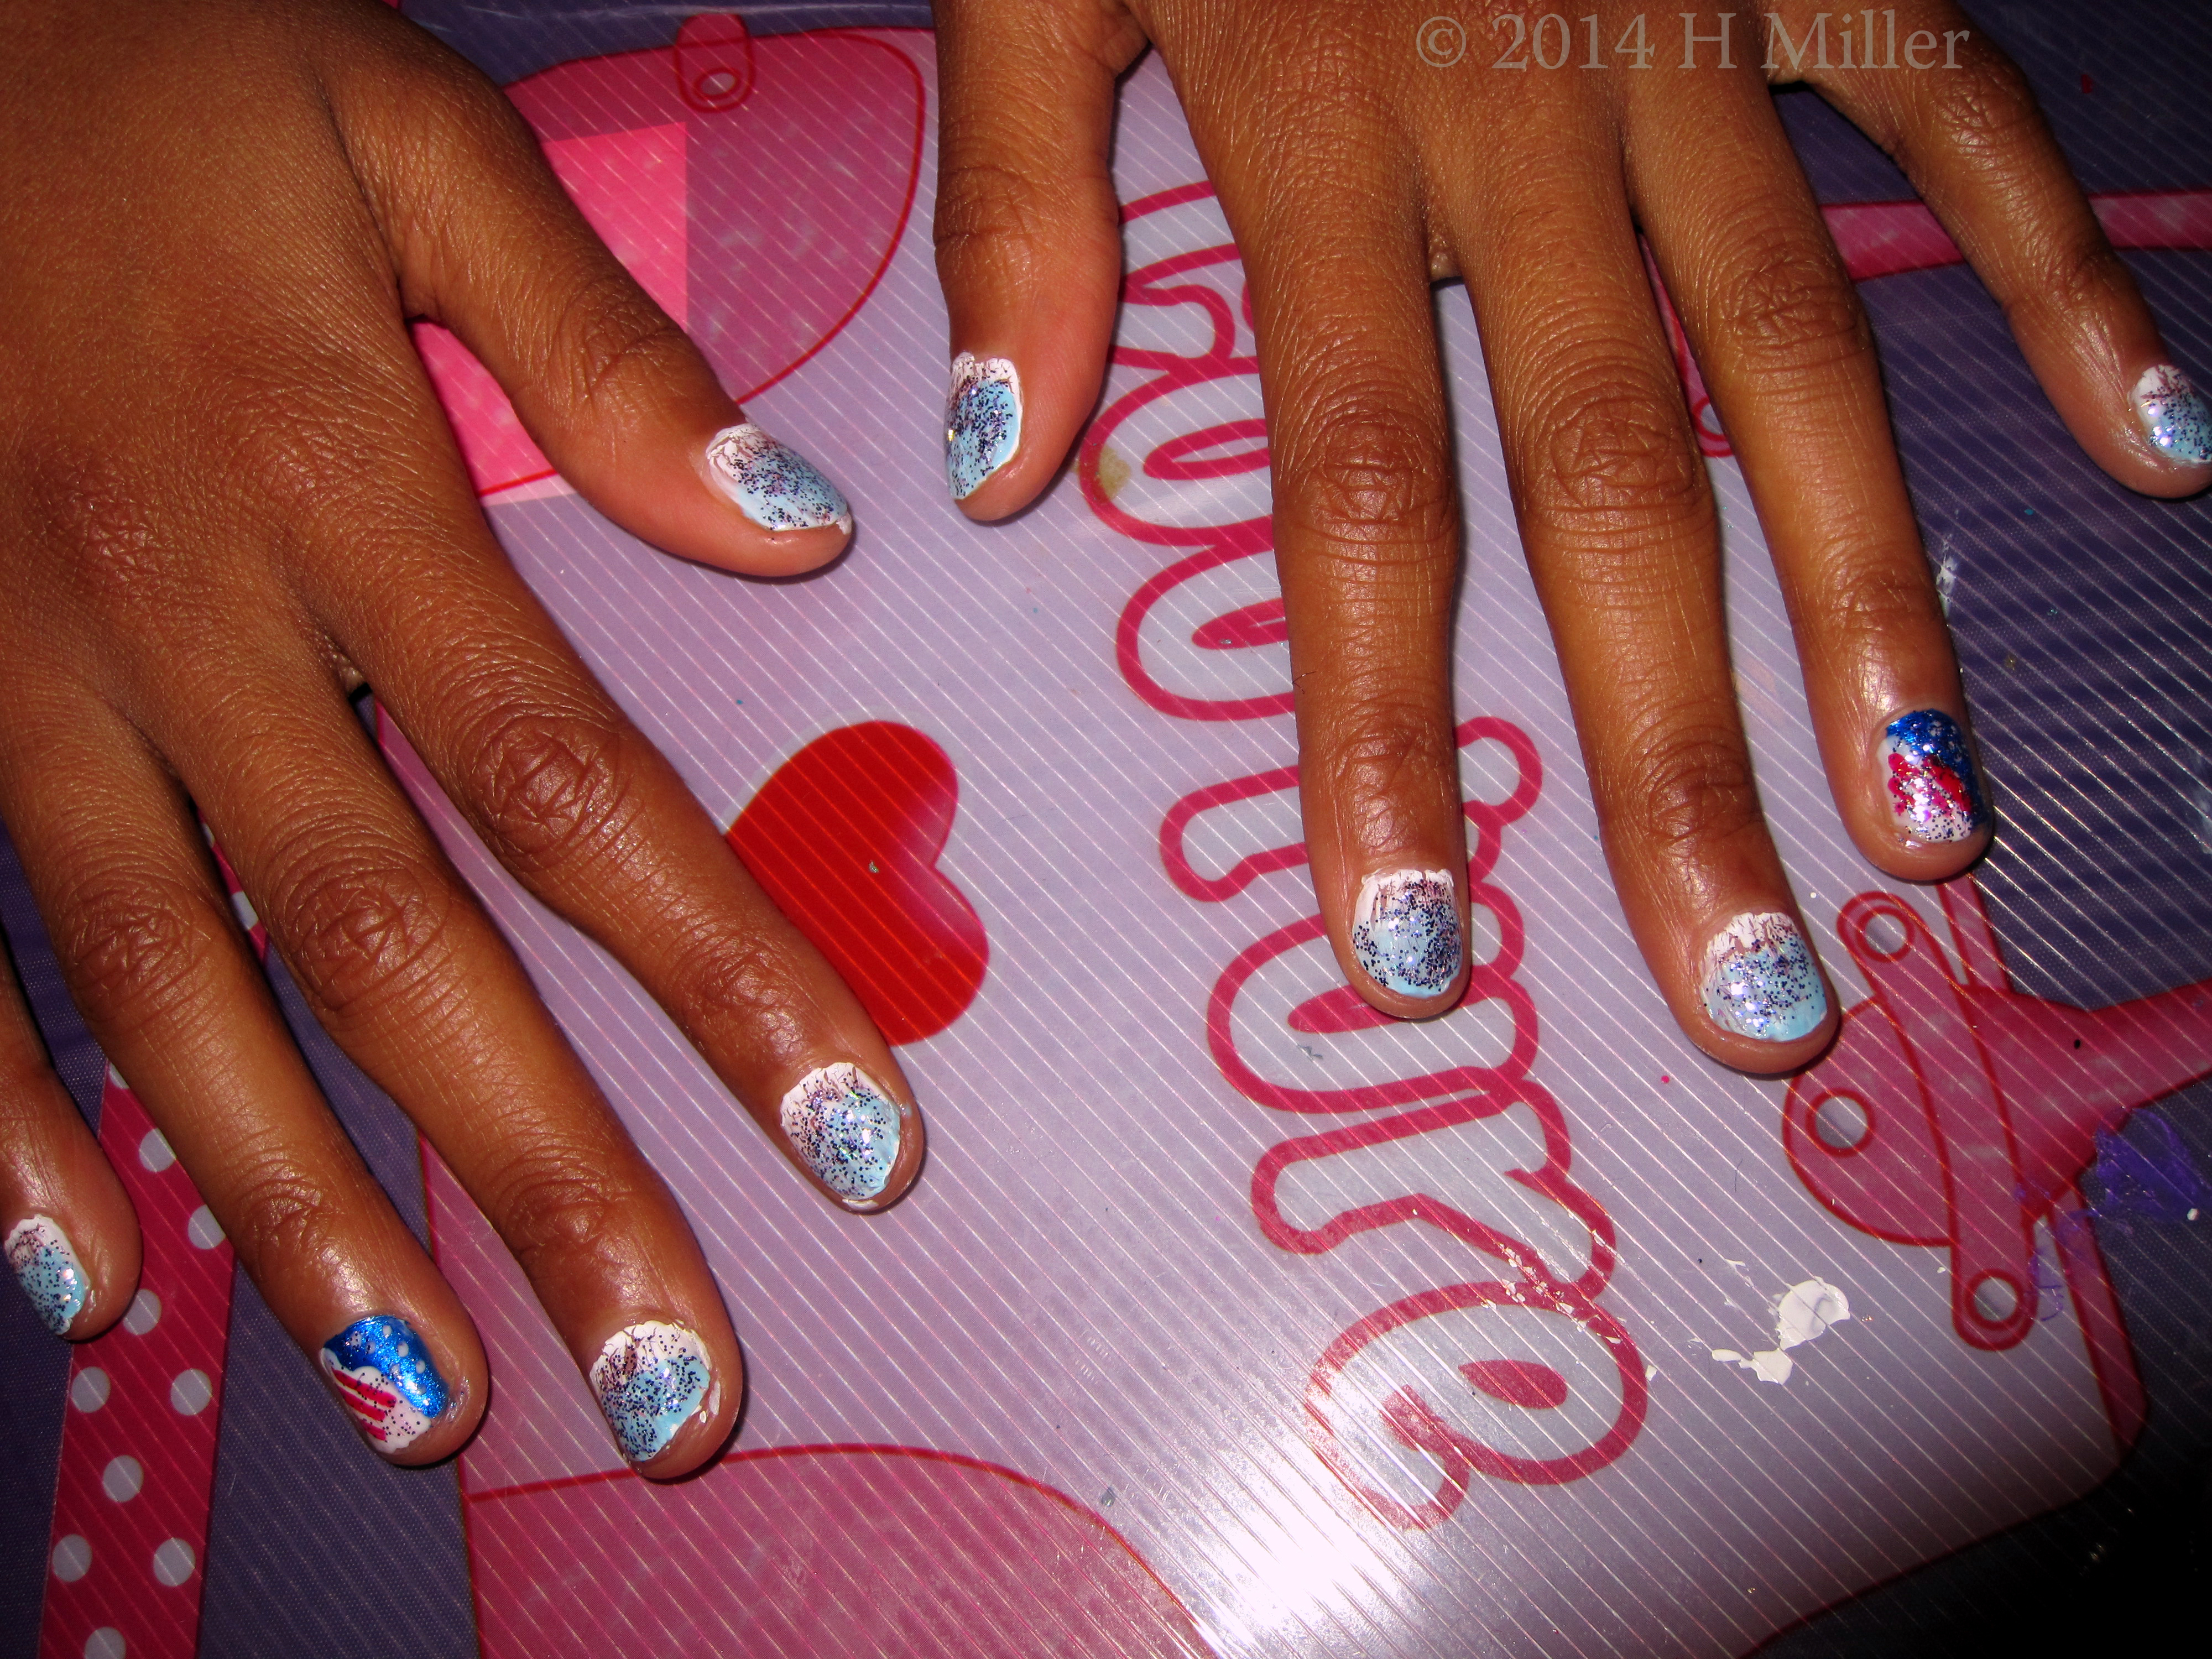 Kids Spa Party Nail Art! OPI Shatter Ombre With Flag Motif.